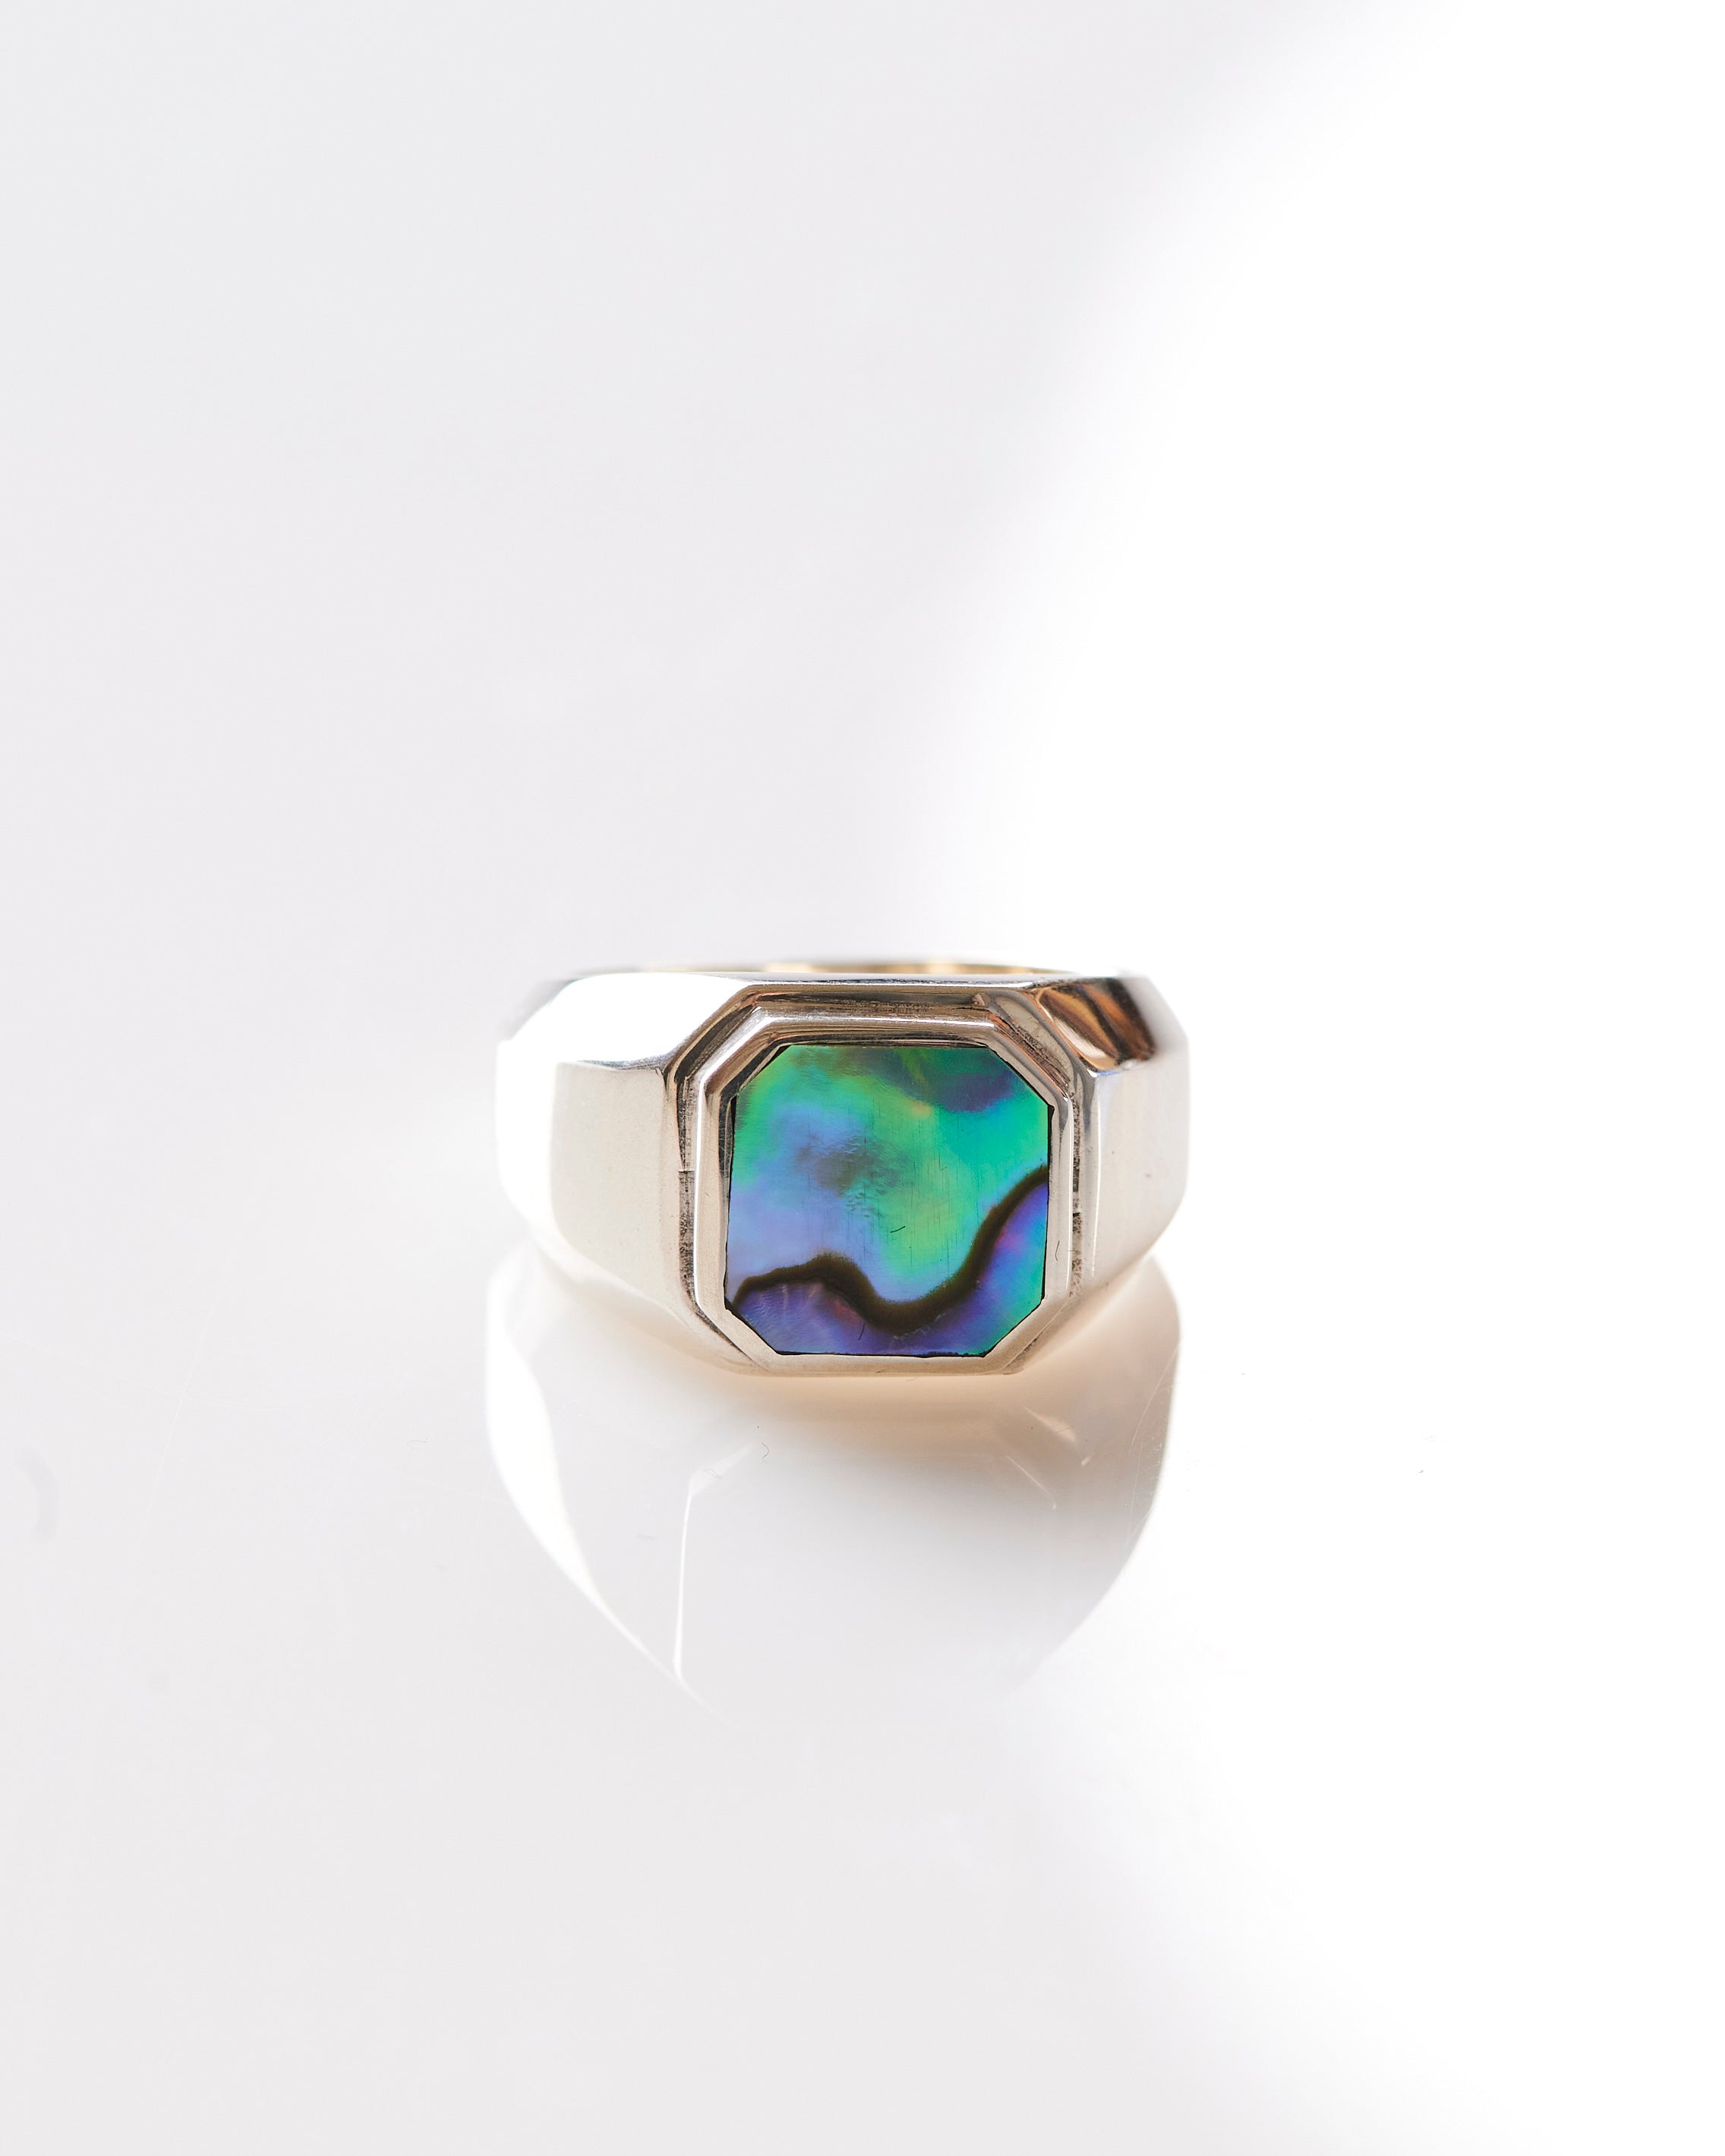 Maple Duppy Signet Ring Silver 925 / Abalone Shell – LESS 17